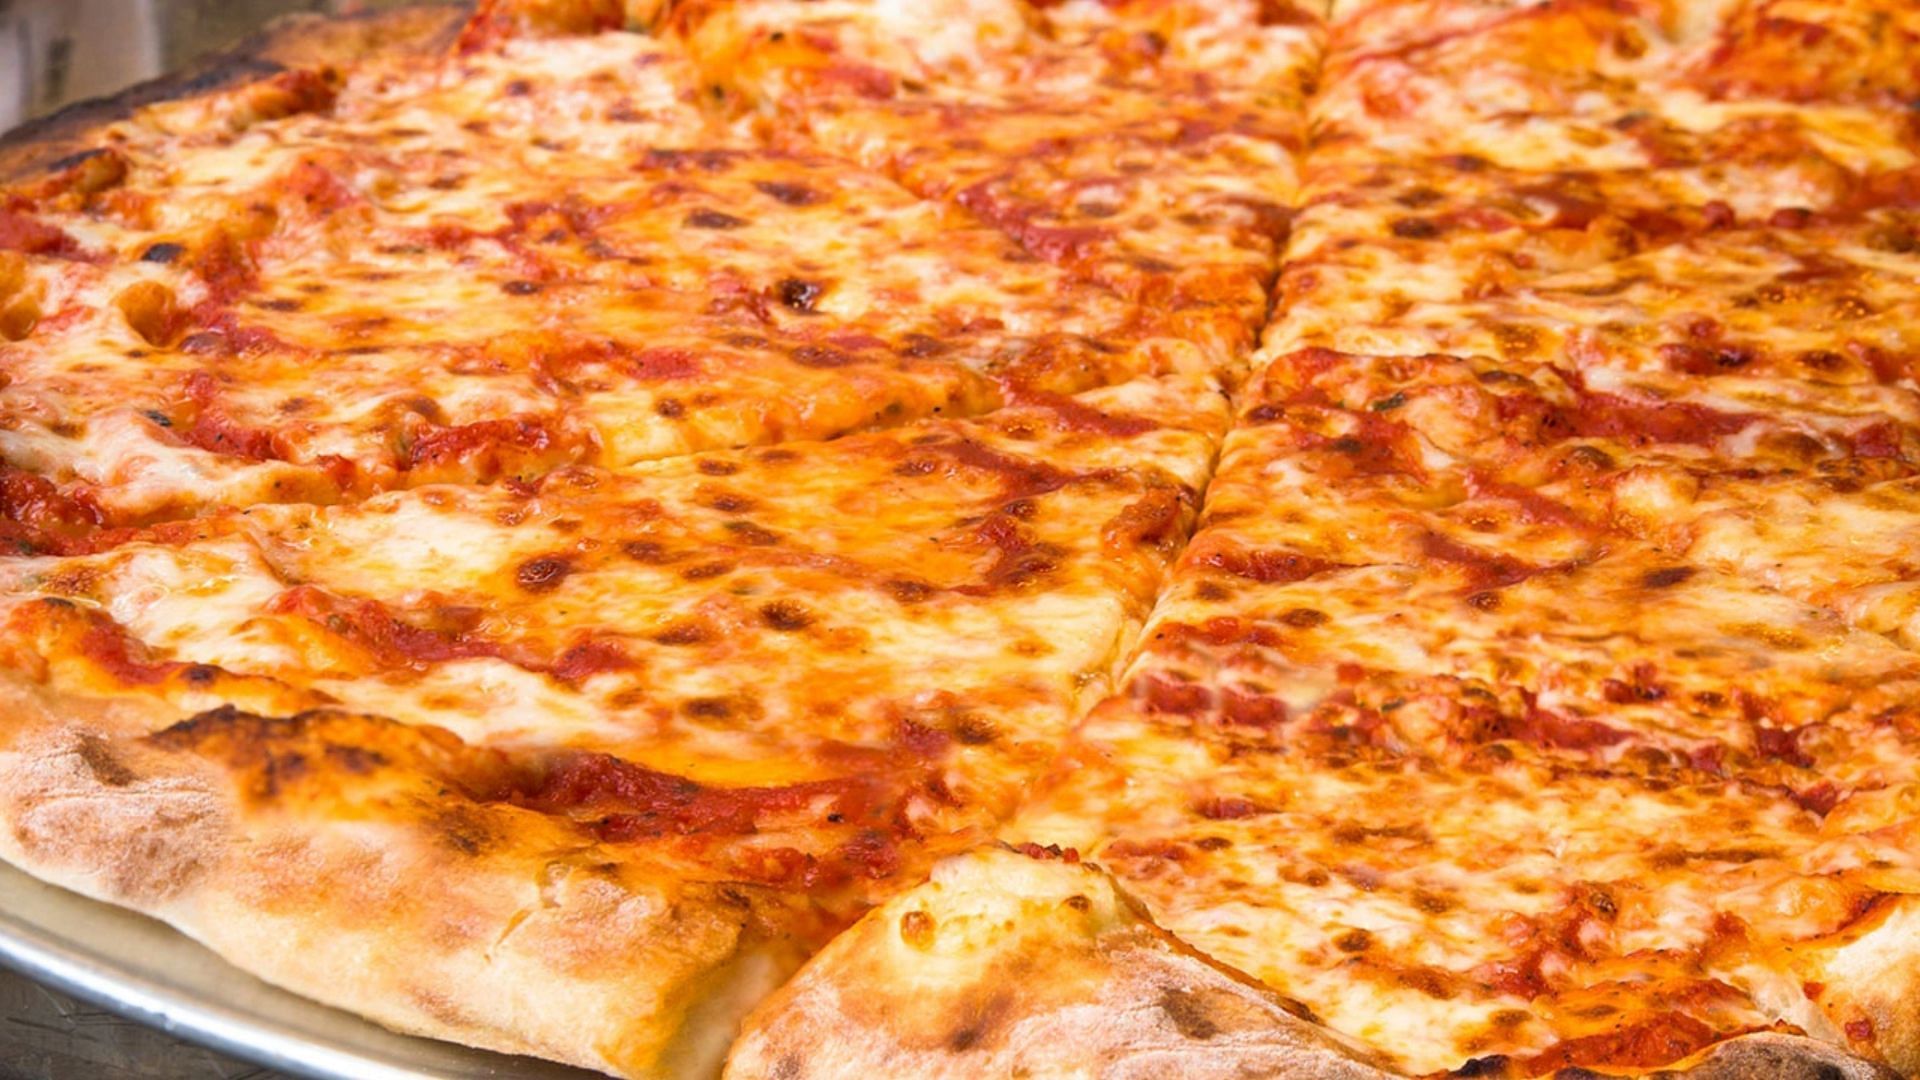 2 Bros Pizza scraps $1 New York pizza slice and will now be offering it at an increased price of $1.50 each (Image via Littleny/iStockphoto/Getty Images)